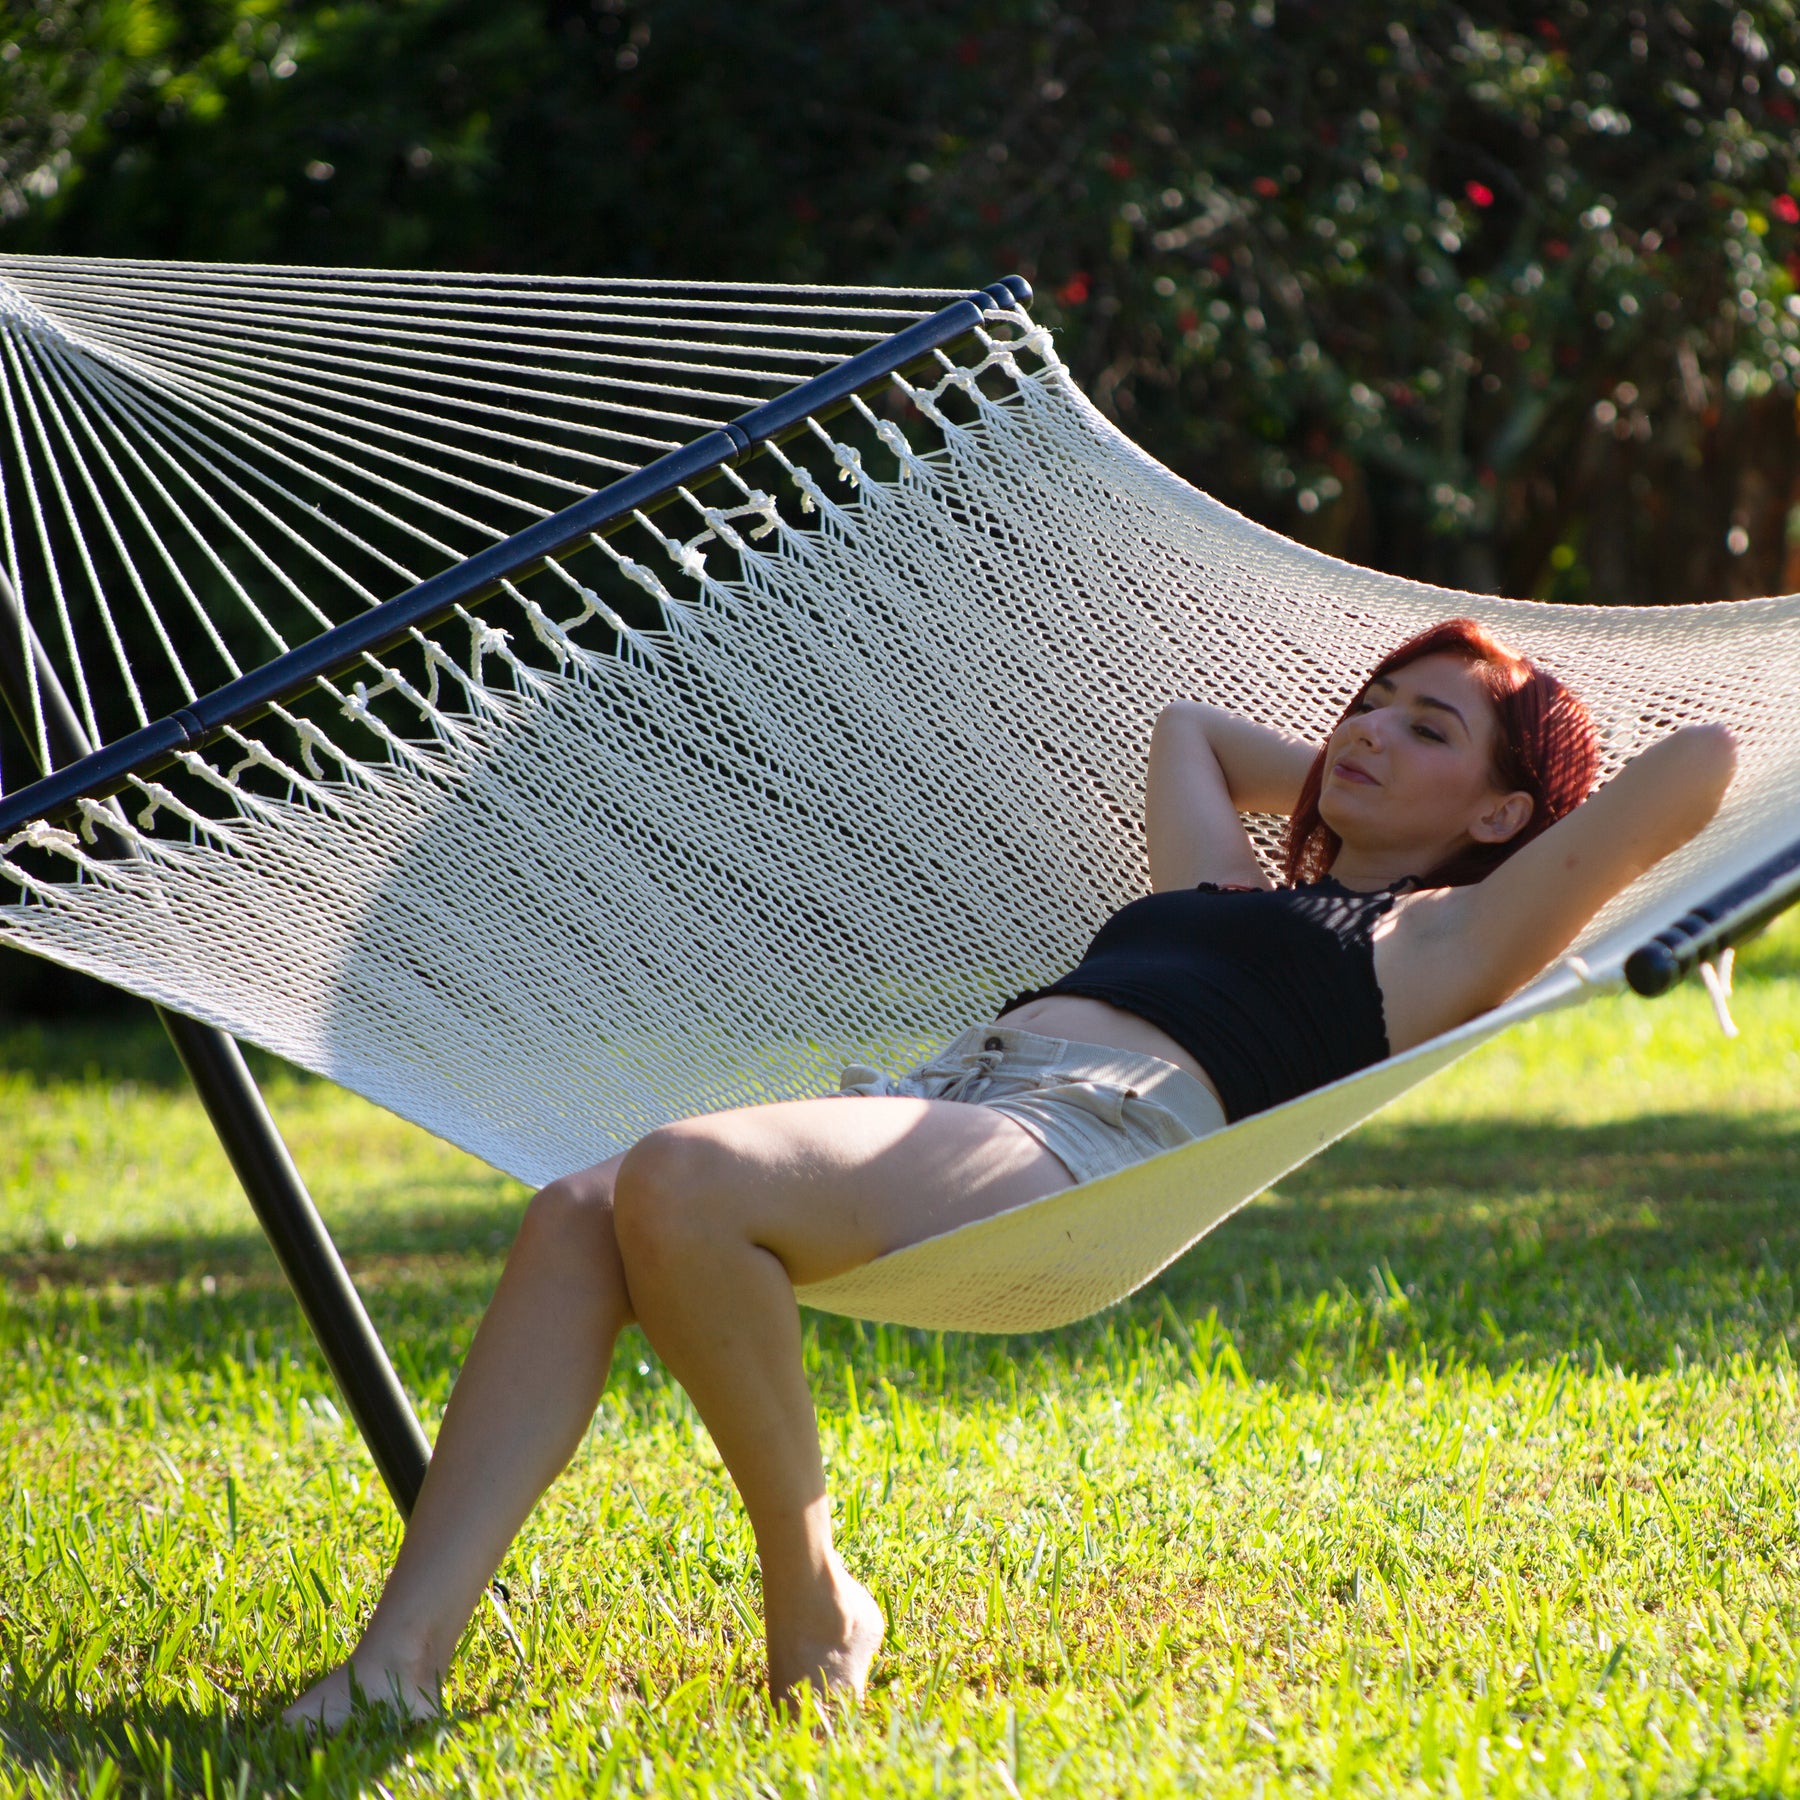 Woman laying back onto the Bliss Hammocks 55-inch Wide 2-Person Weekender Deluxe Hammock with Spreader Bars while her feet touch the grass.